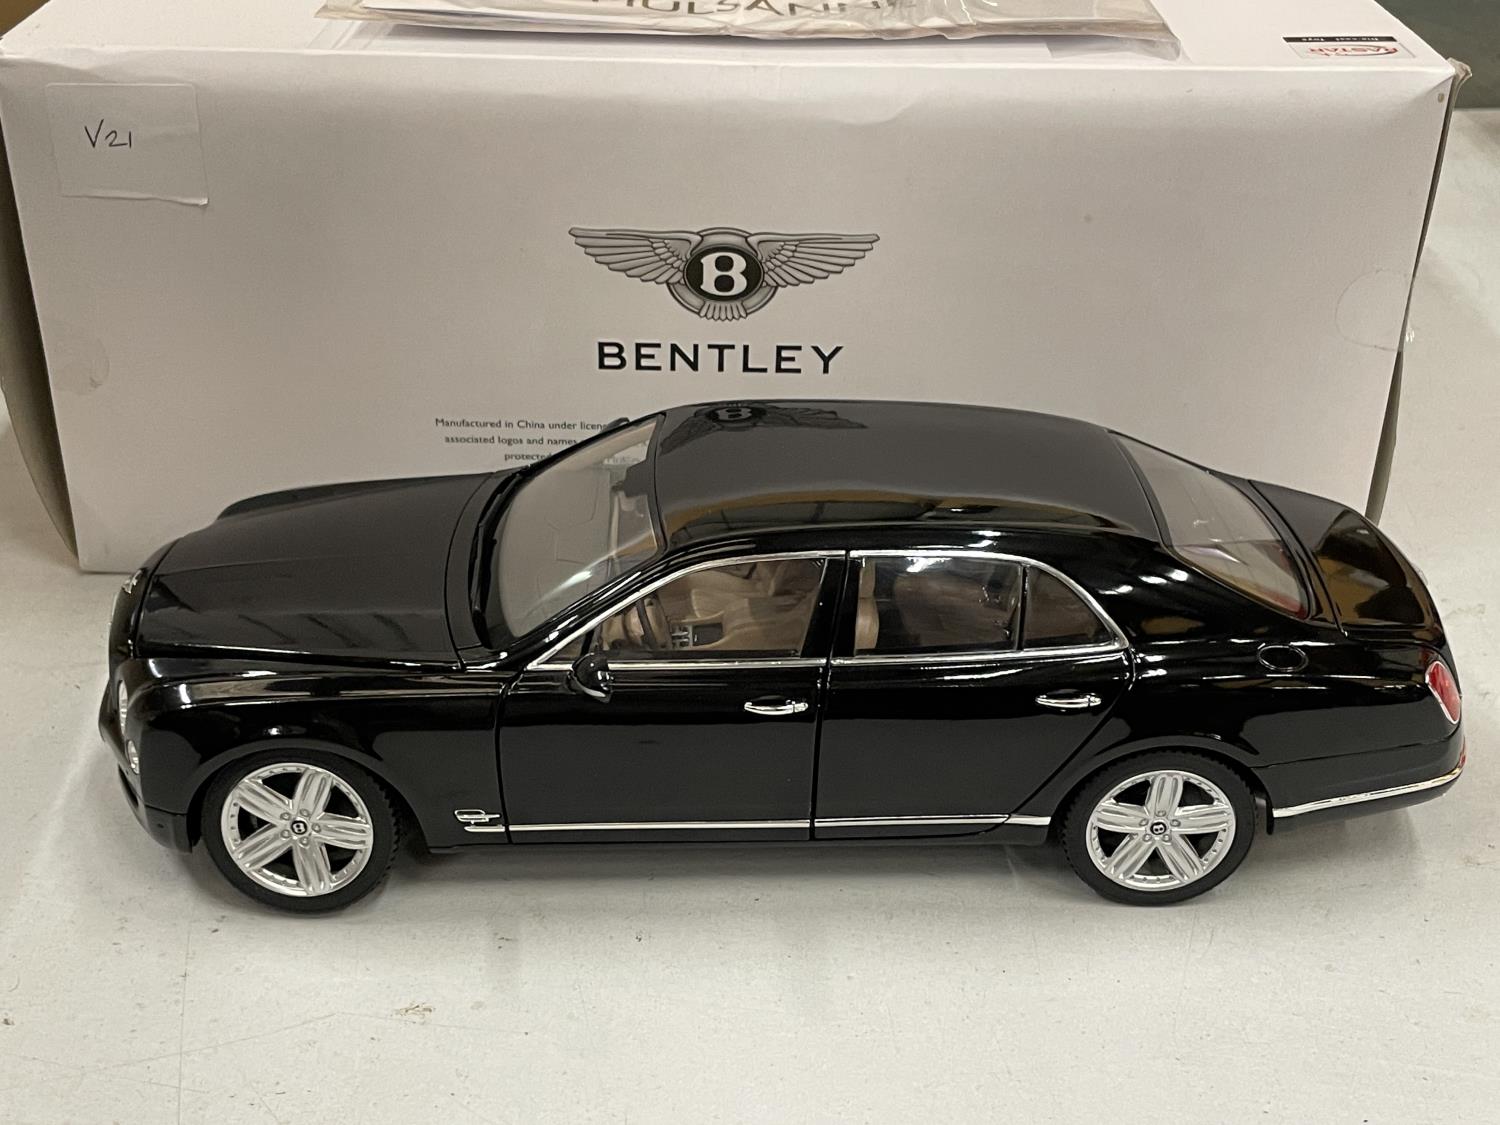 A BOXED MULSANNE BENTLEY MODEL CAR 1:18 SCALE - Image 2 of 6